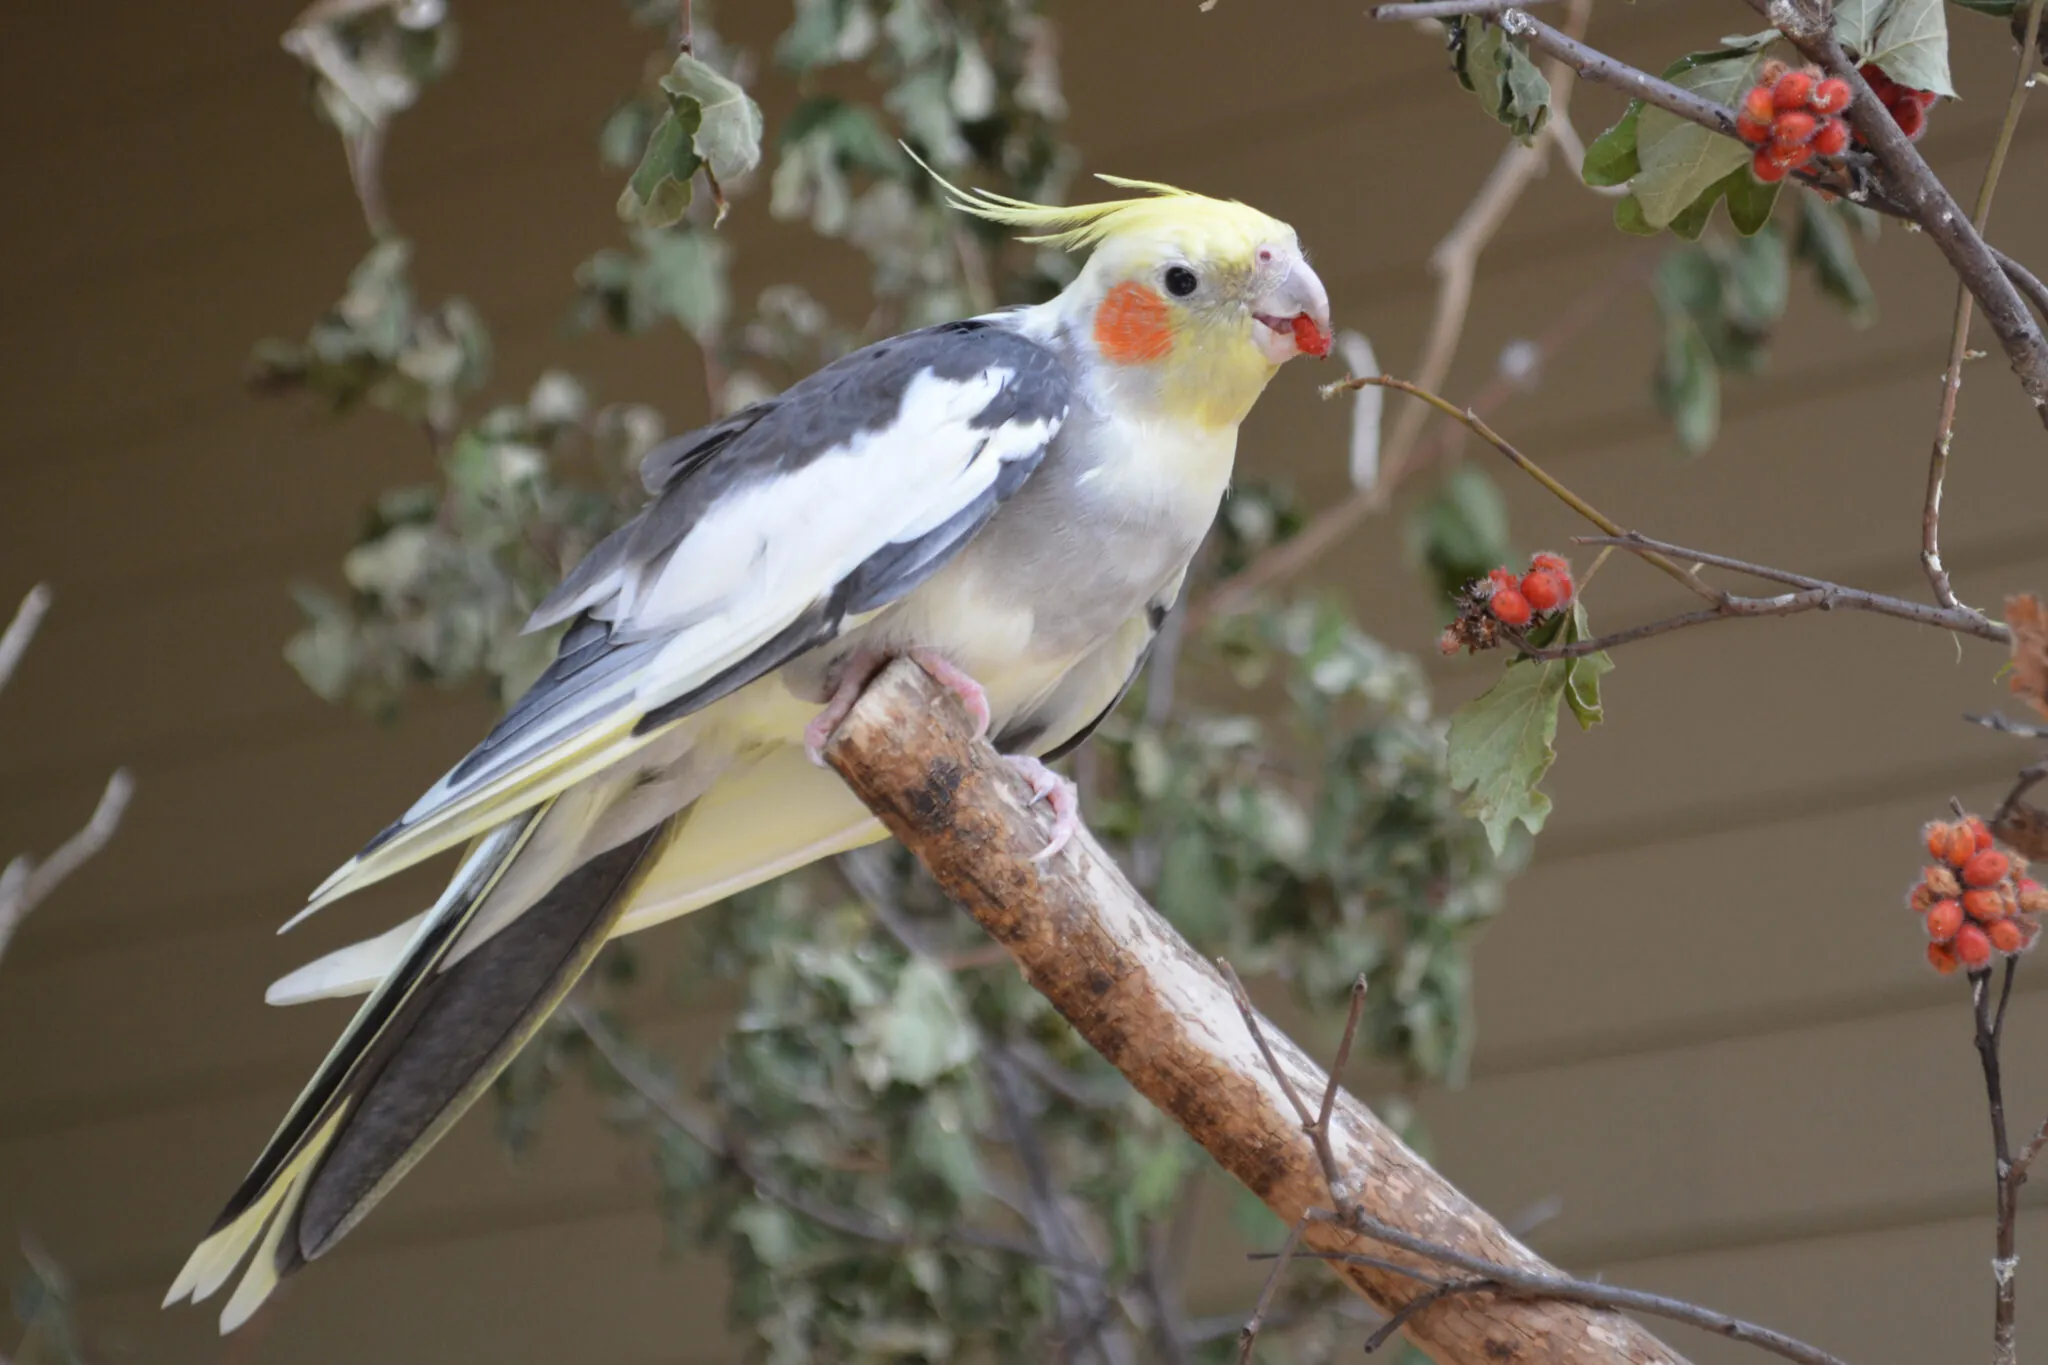 Cockatiel on a branch eating a berry